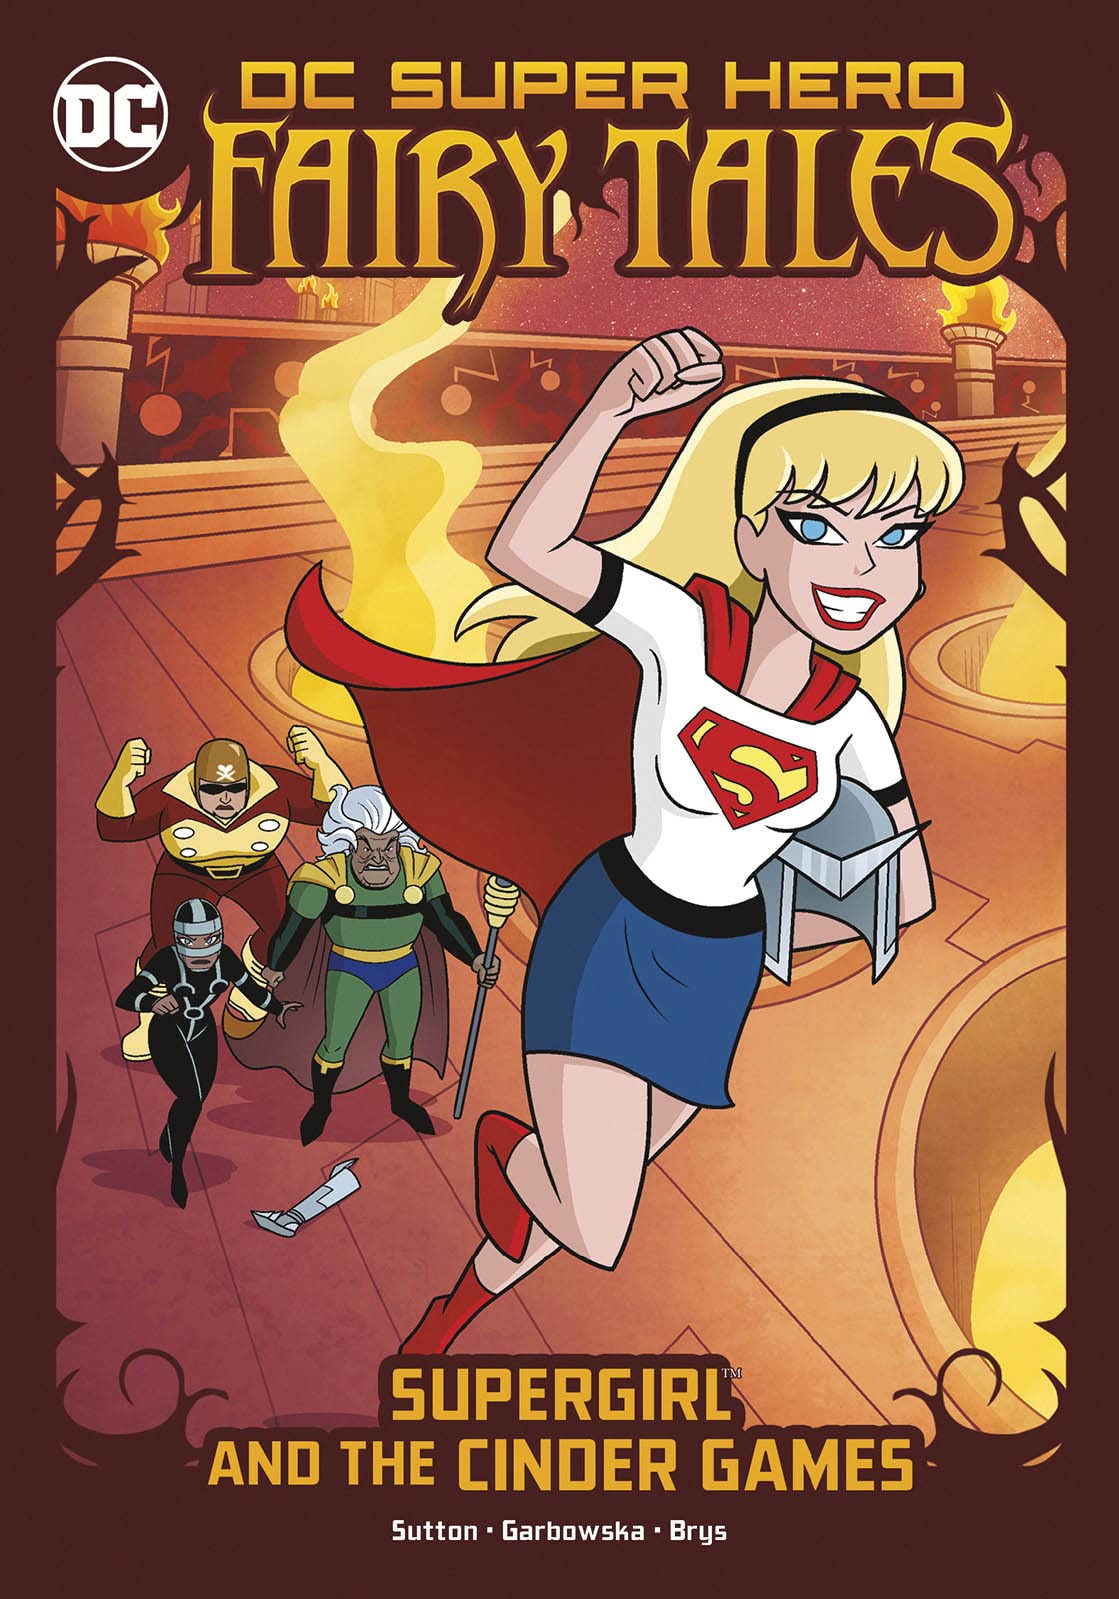 DC Super Hero Fairy Tales: Supergirl and the Cinder Games - Third Eye